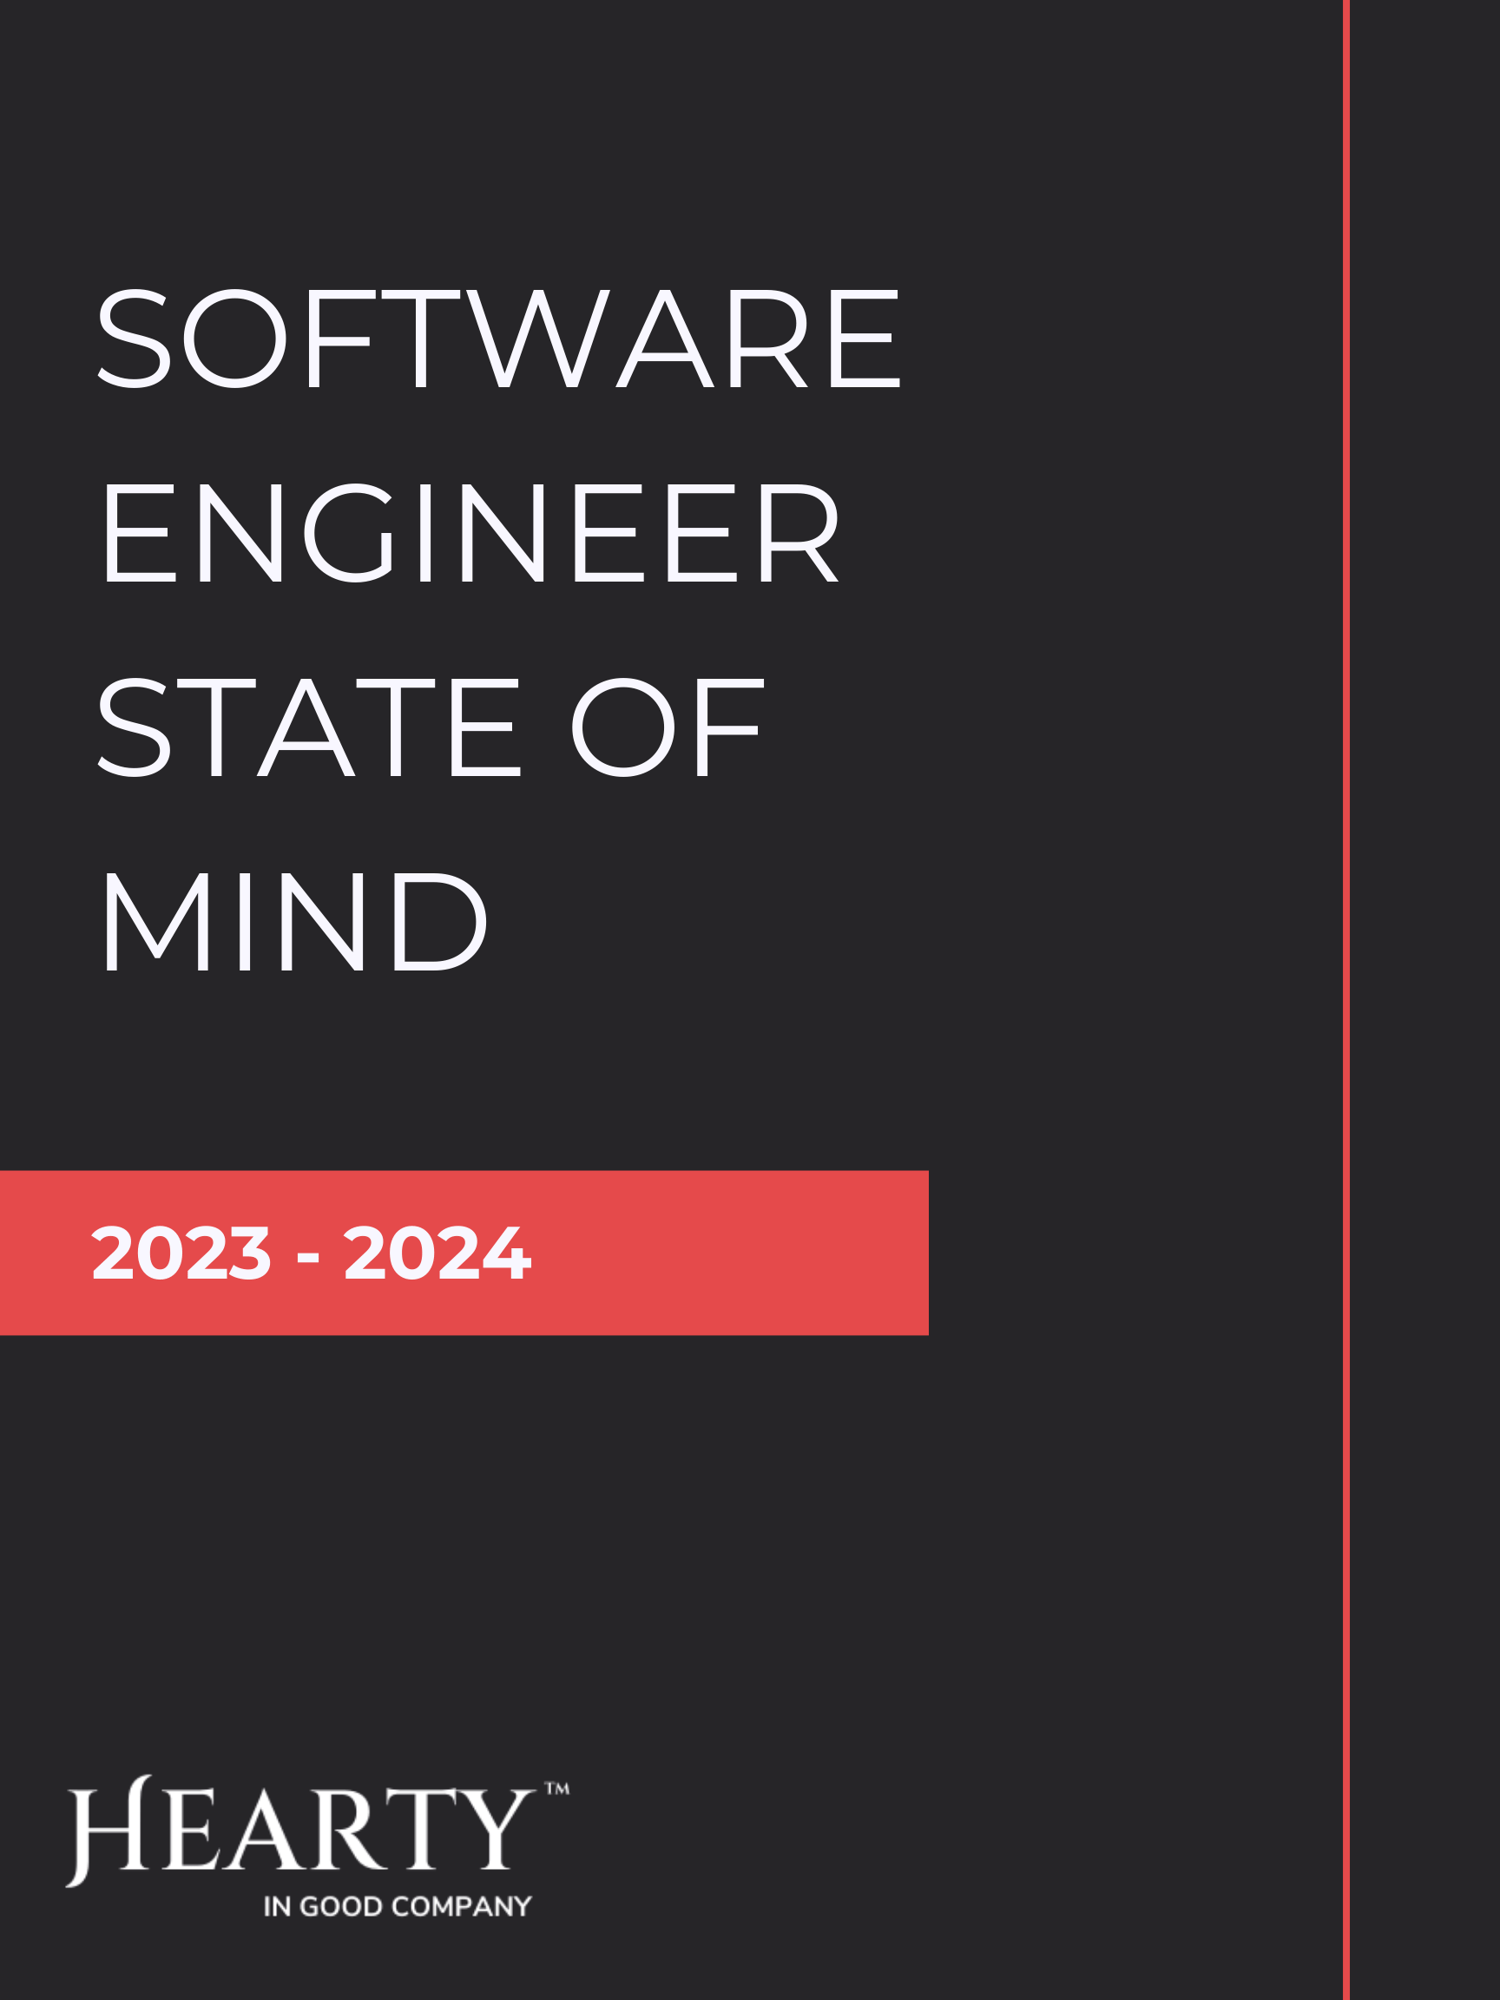 Software Engineer State of Mind Report (1)